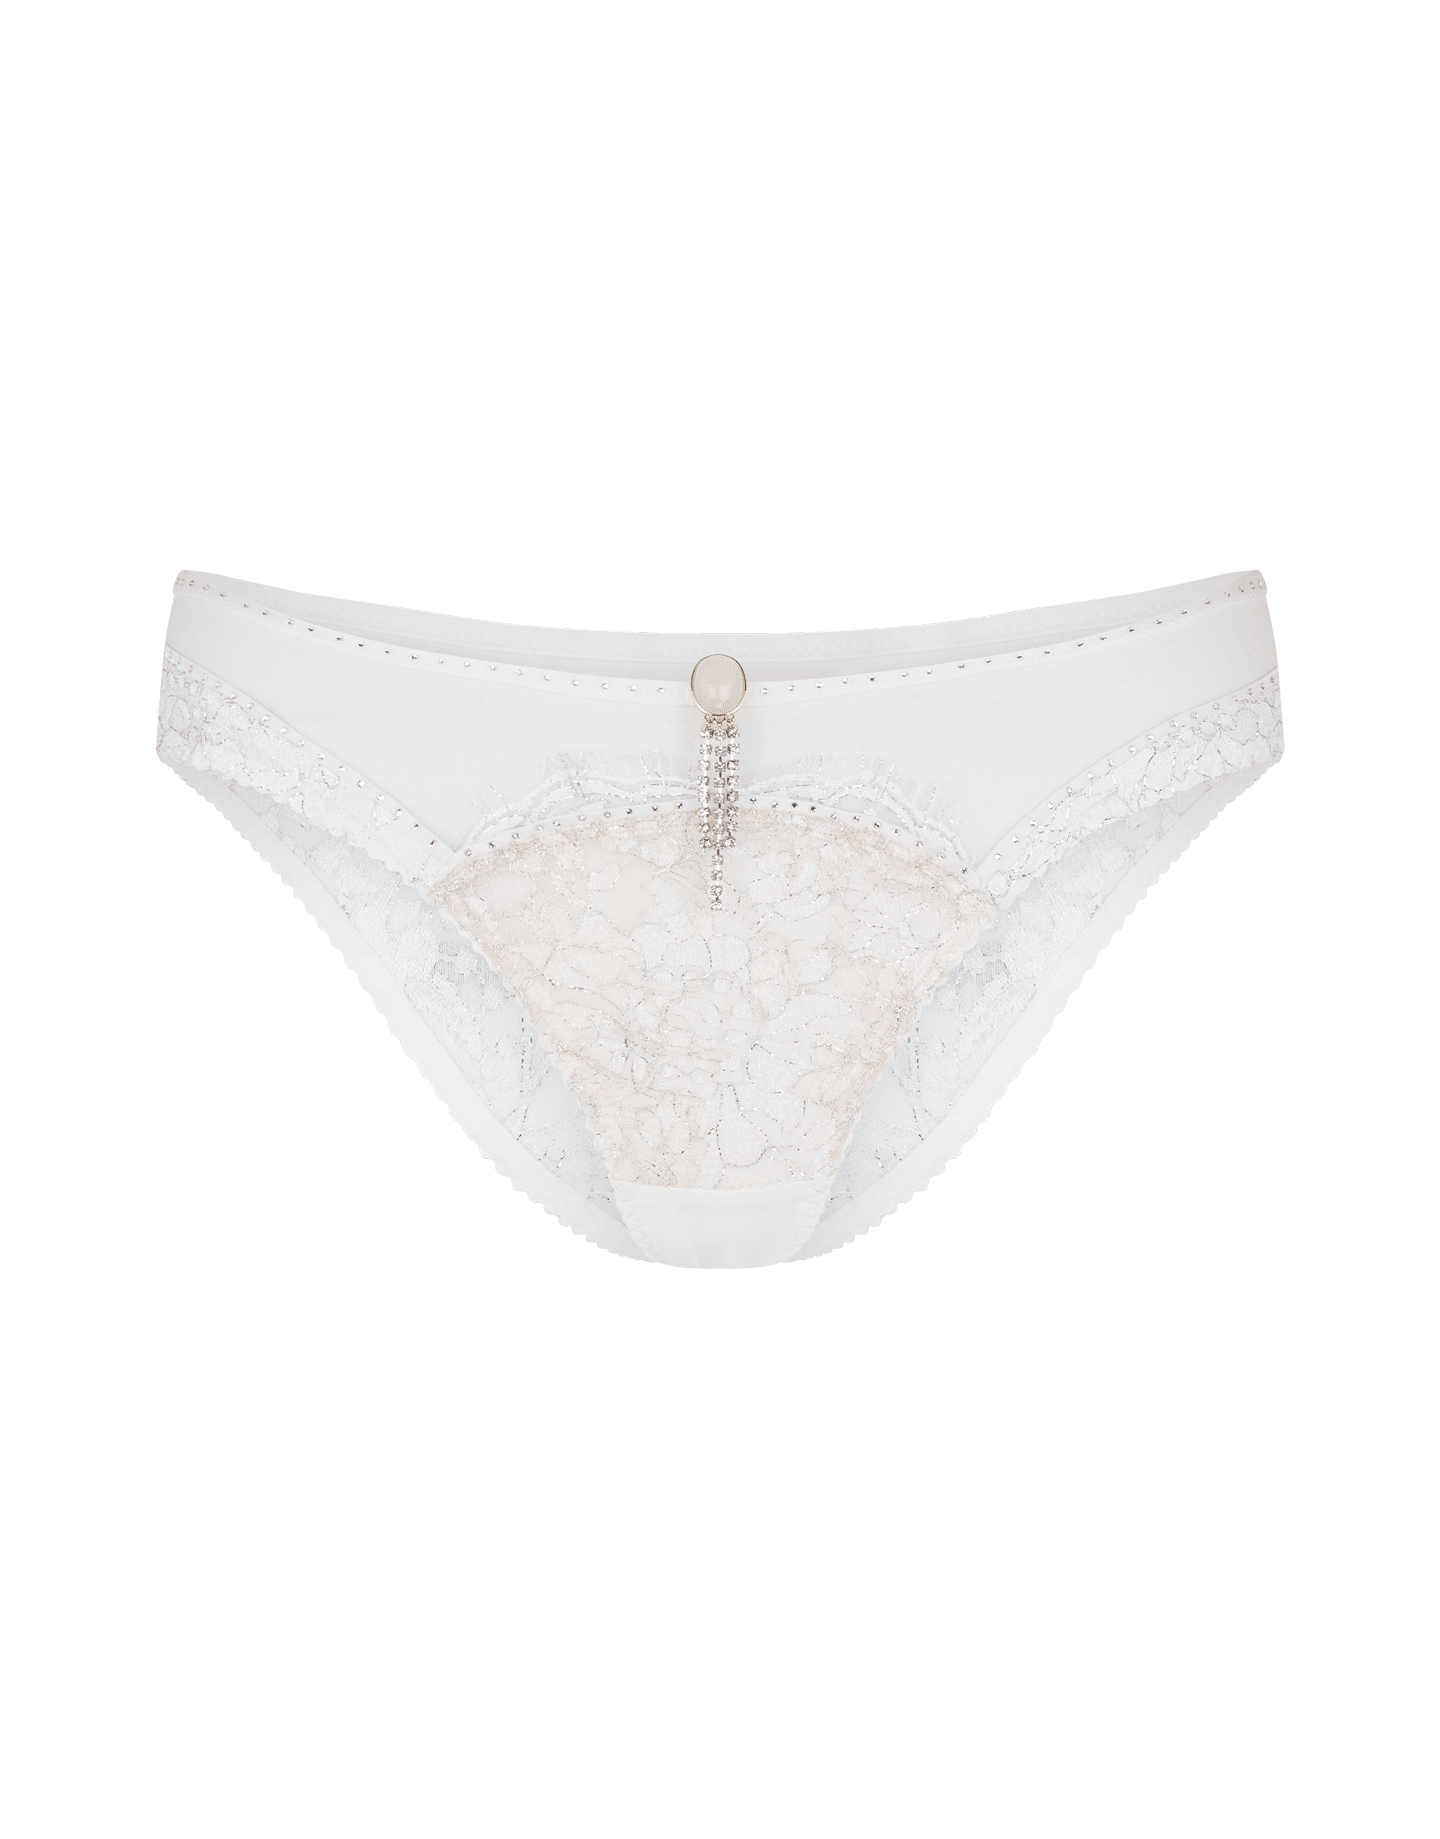 Presley Full Brief in White | Agent Provocateur